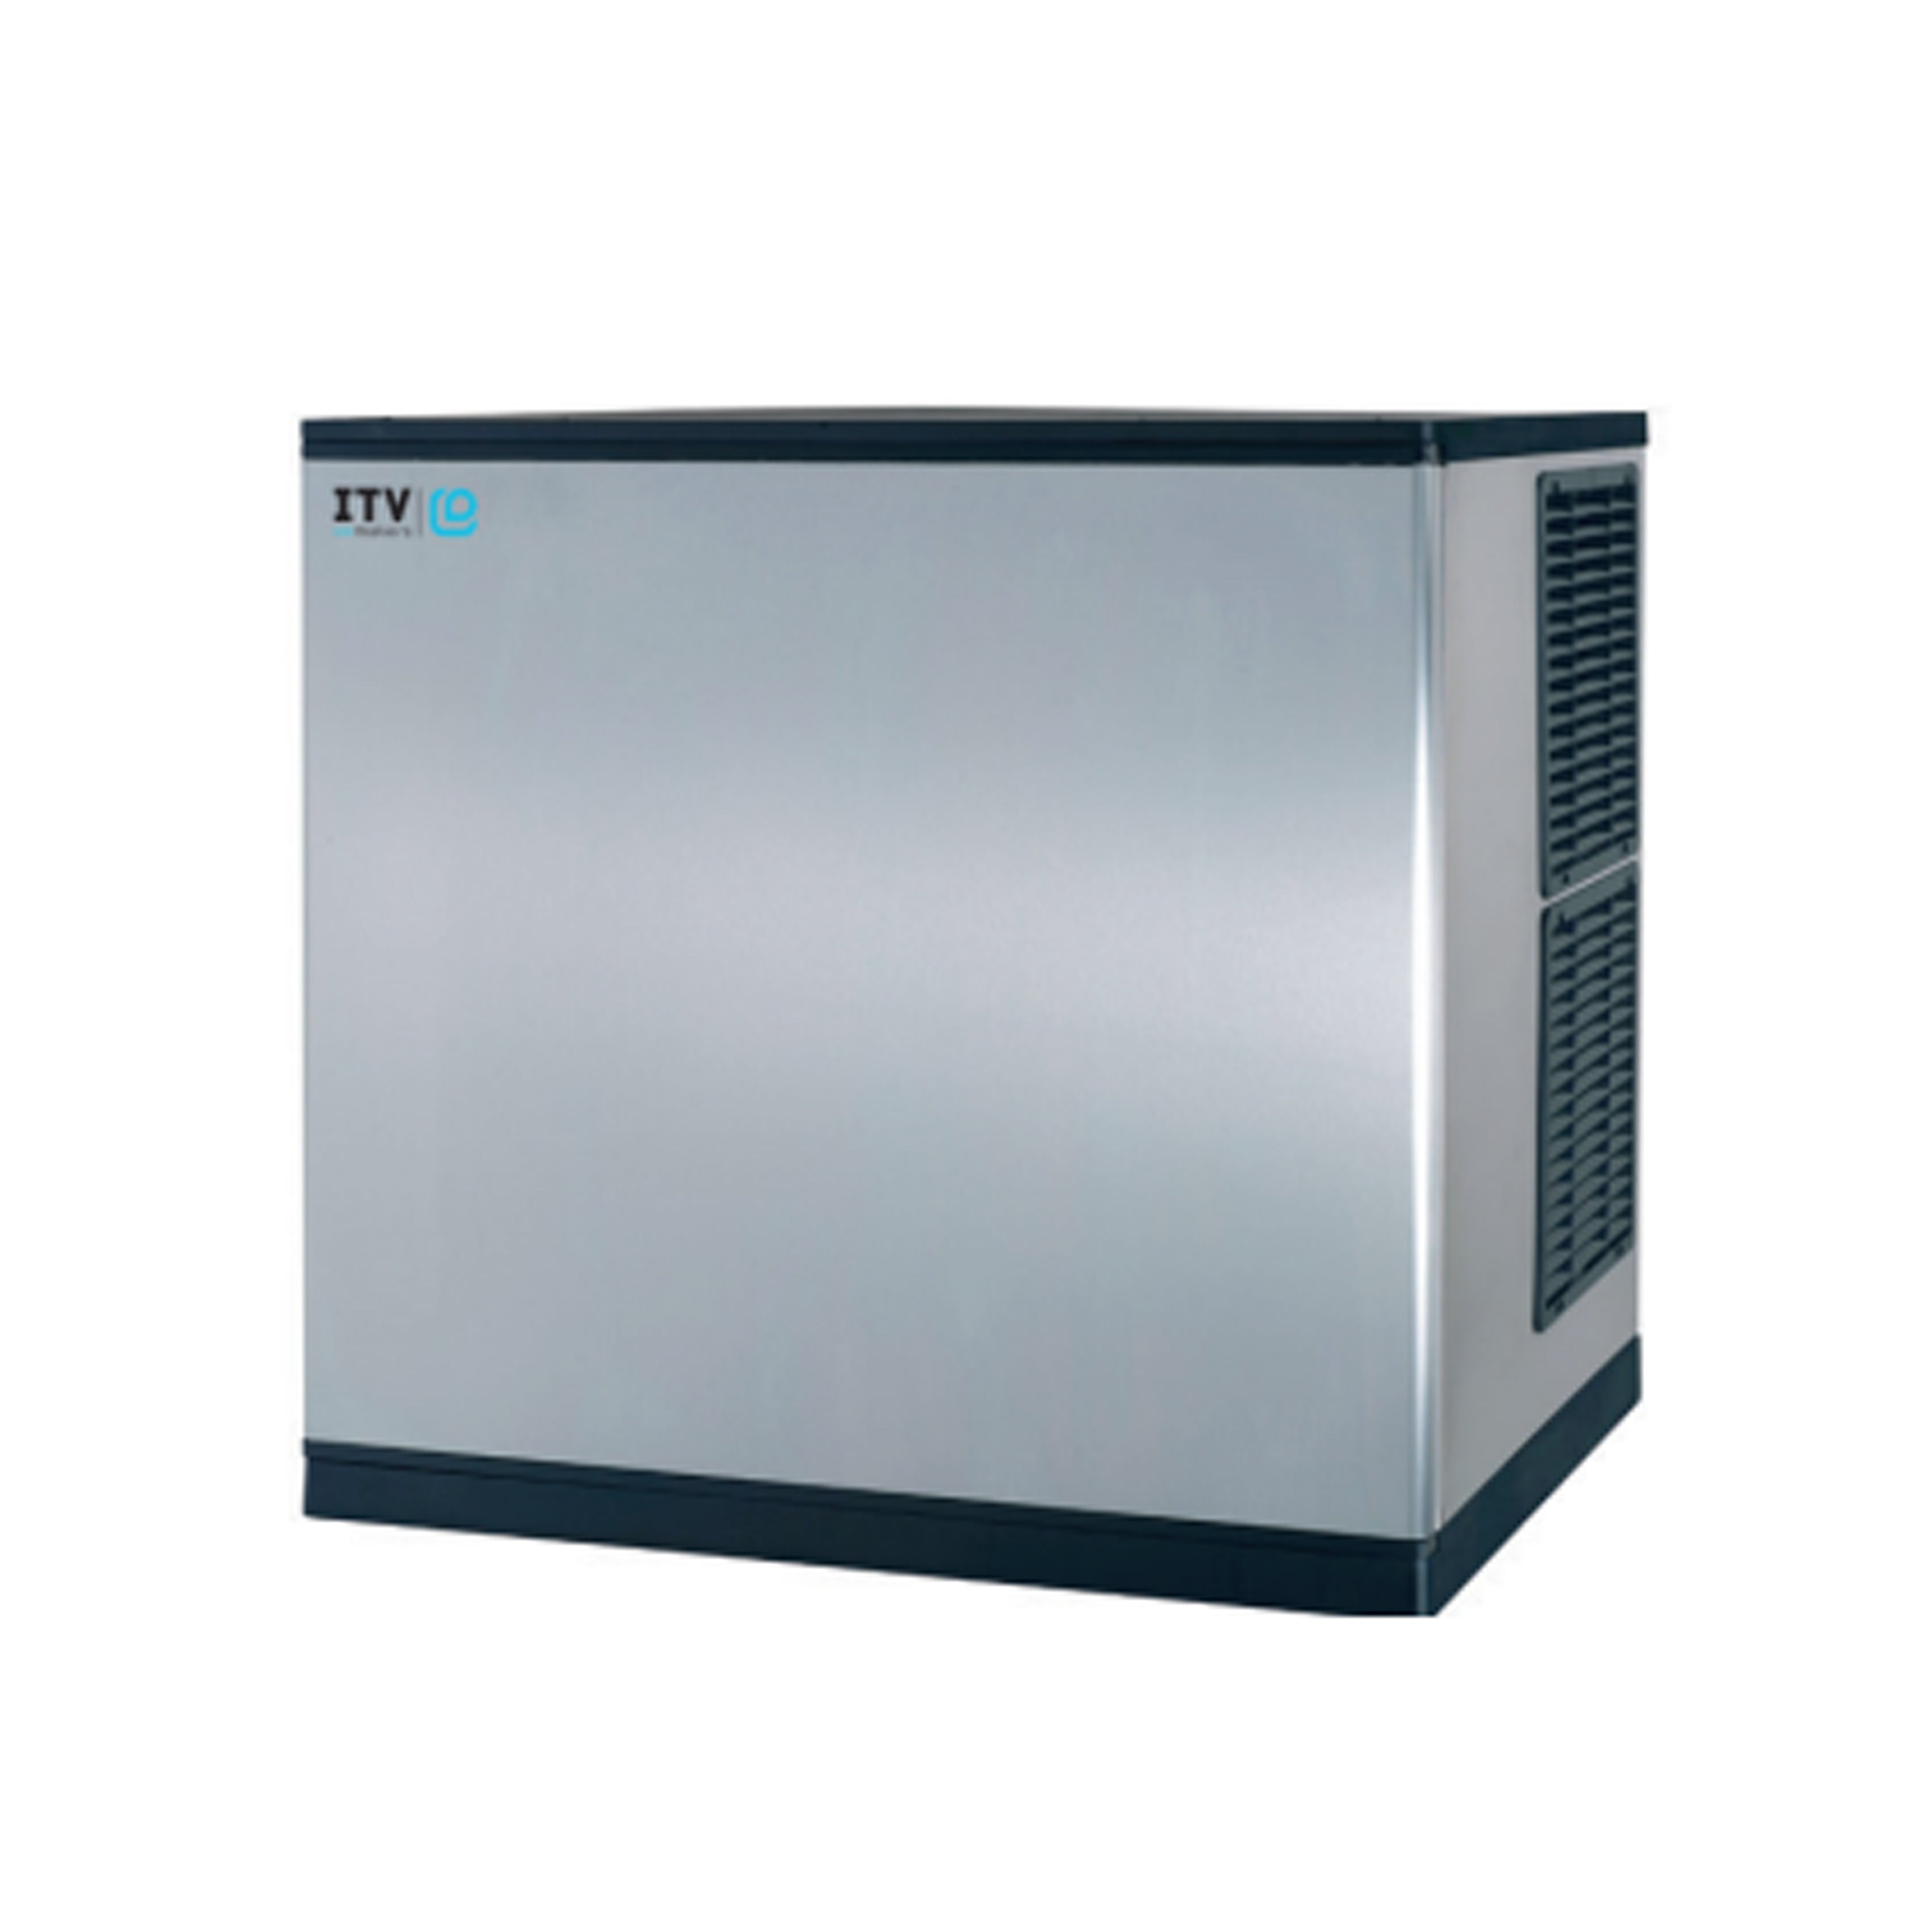 ITV - SPIKA MS 1000 (2) A, Commercial Spika Cubers Ice Maker Modular Ice Cube Machine 974lbs